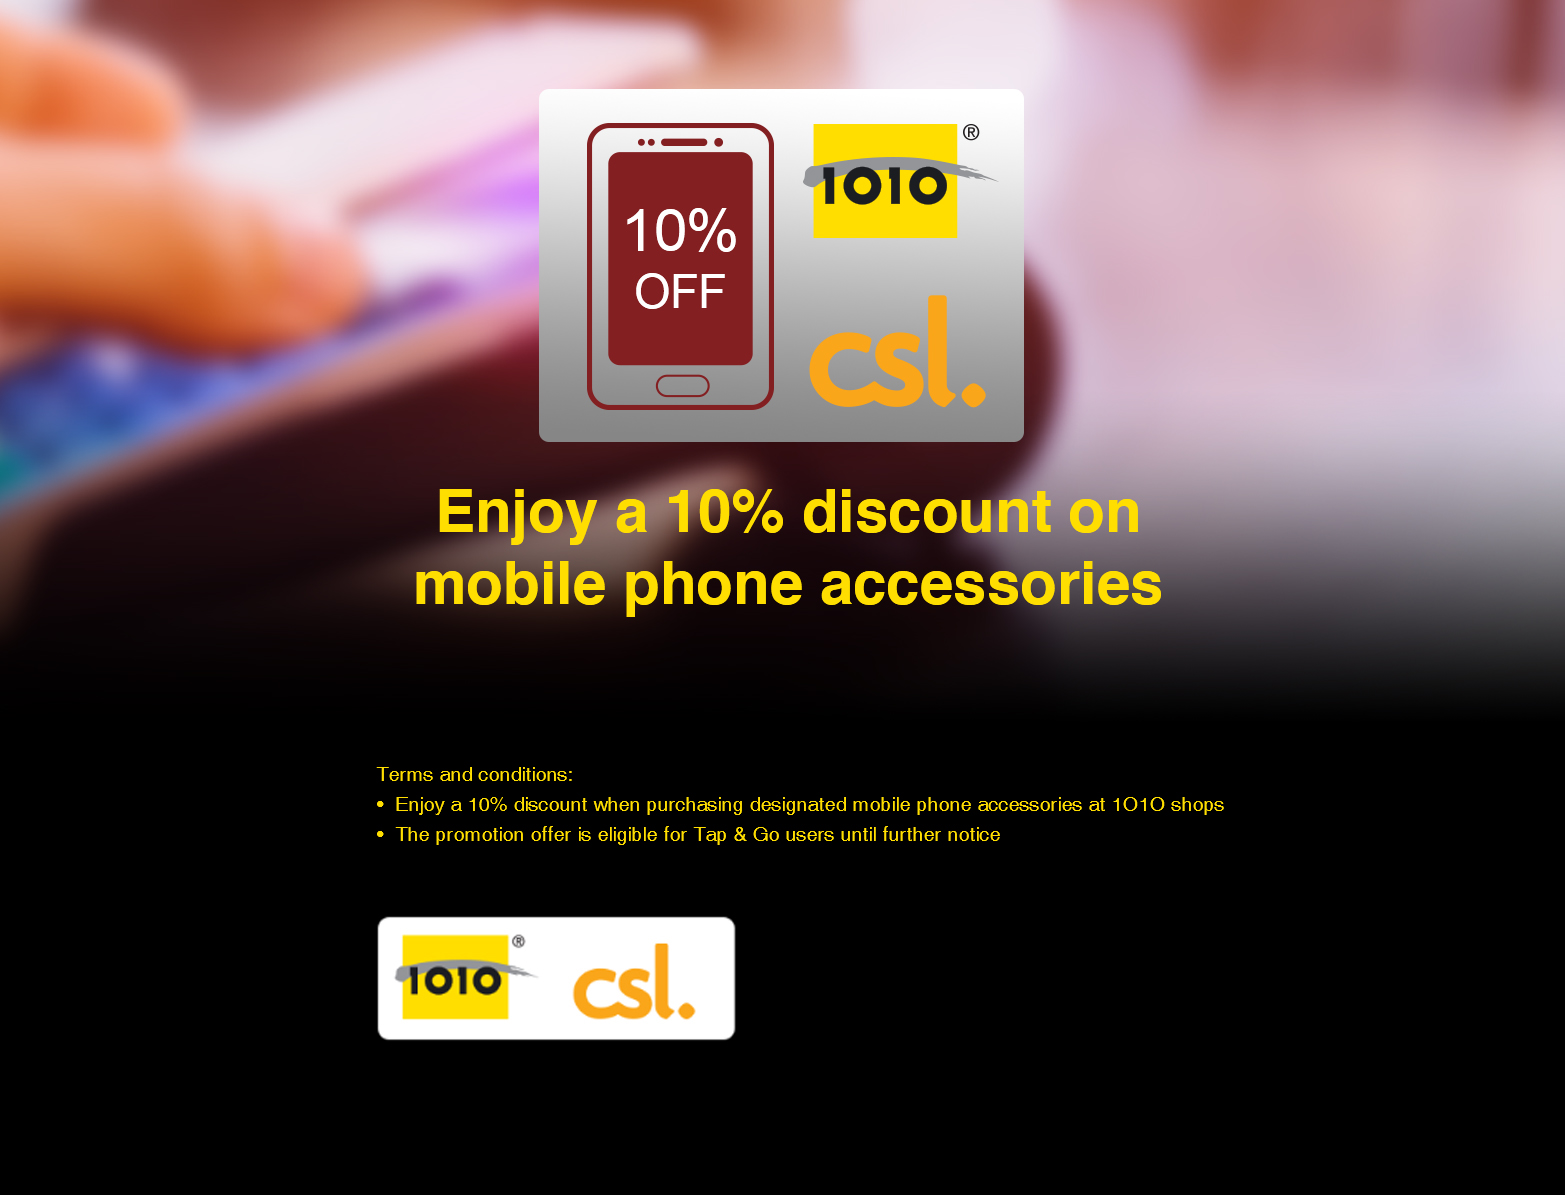 1O1O x csl - Enjoy a 10% discount on mobile phone accessories